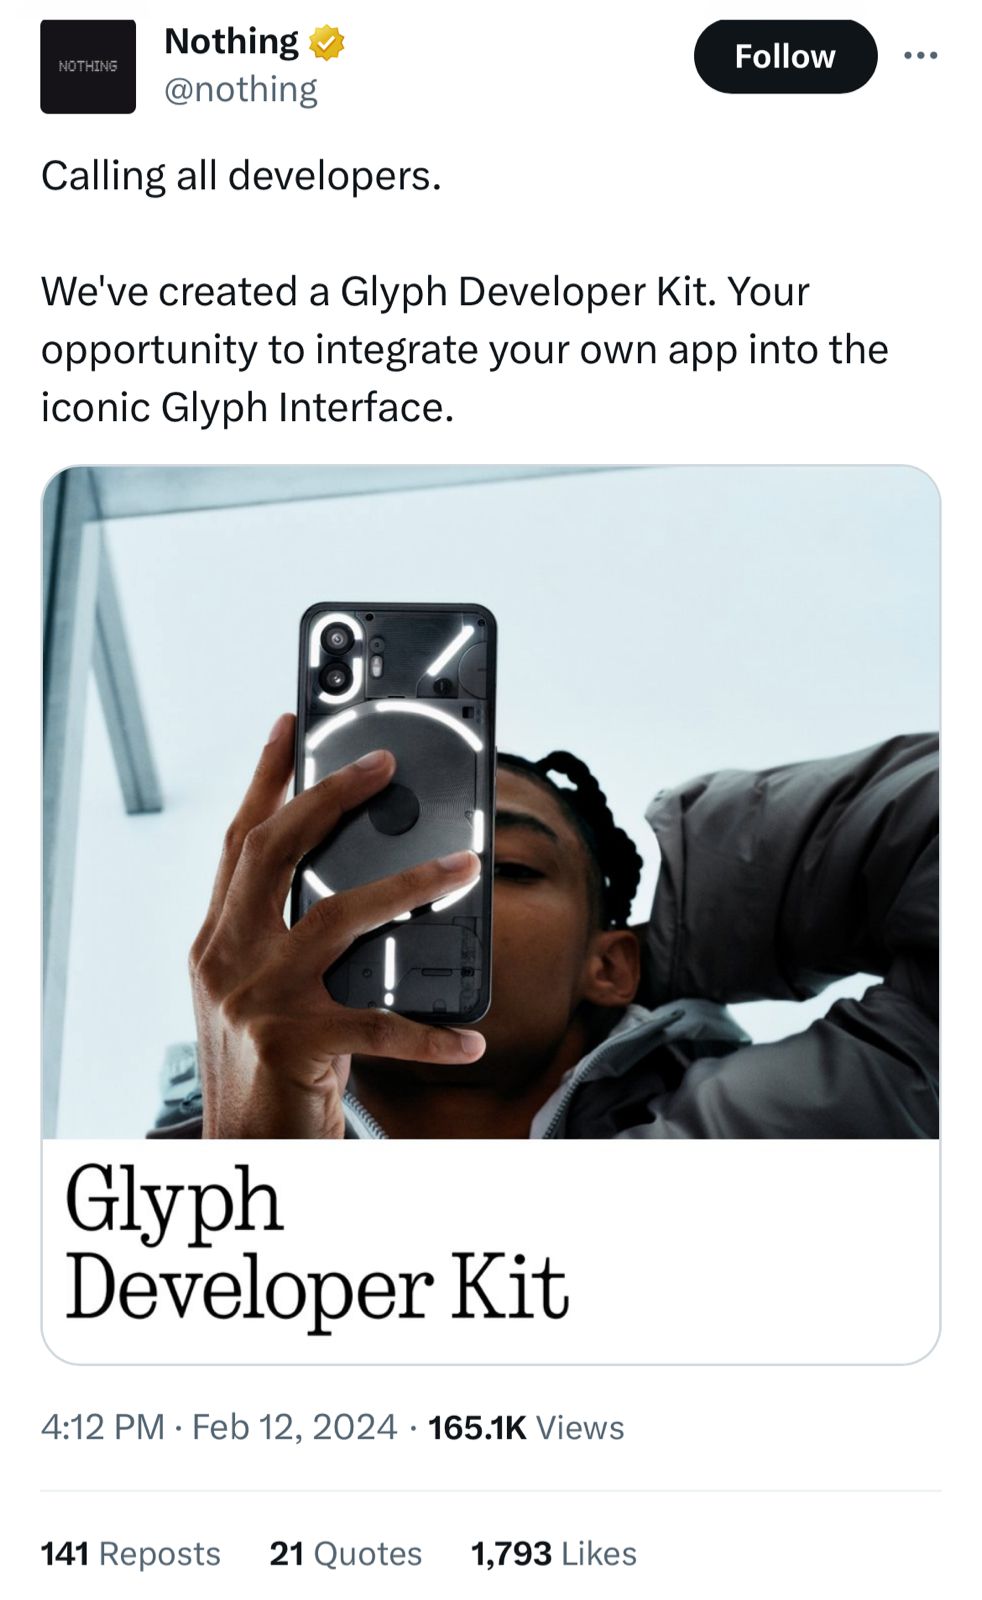 Nothing has released “Glyph Developer Kit” for Phone (1) and Phone (2)